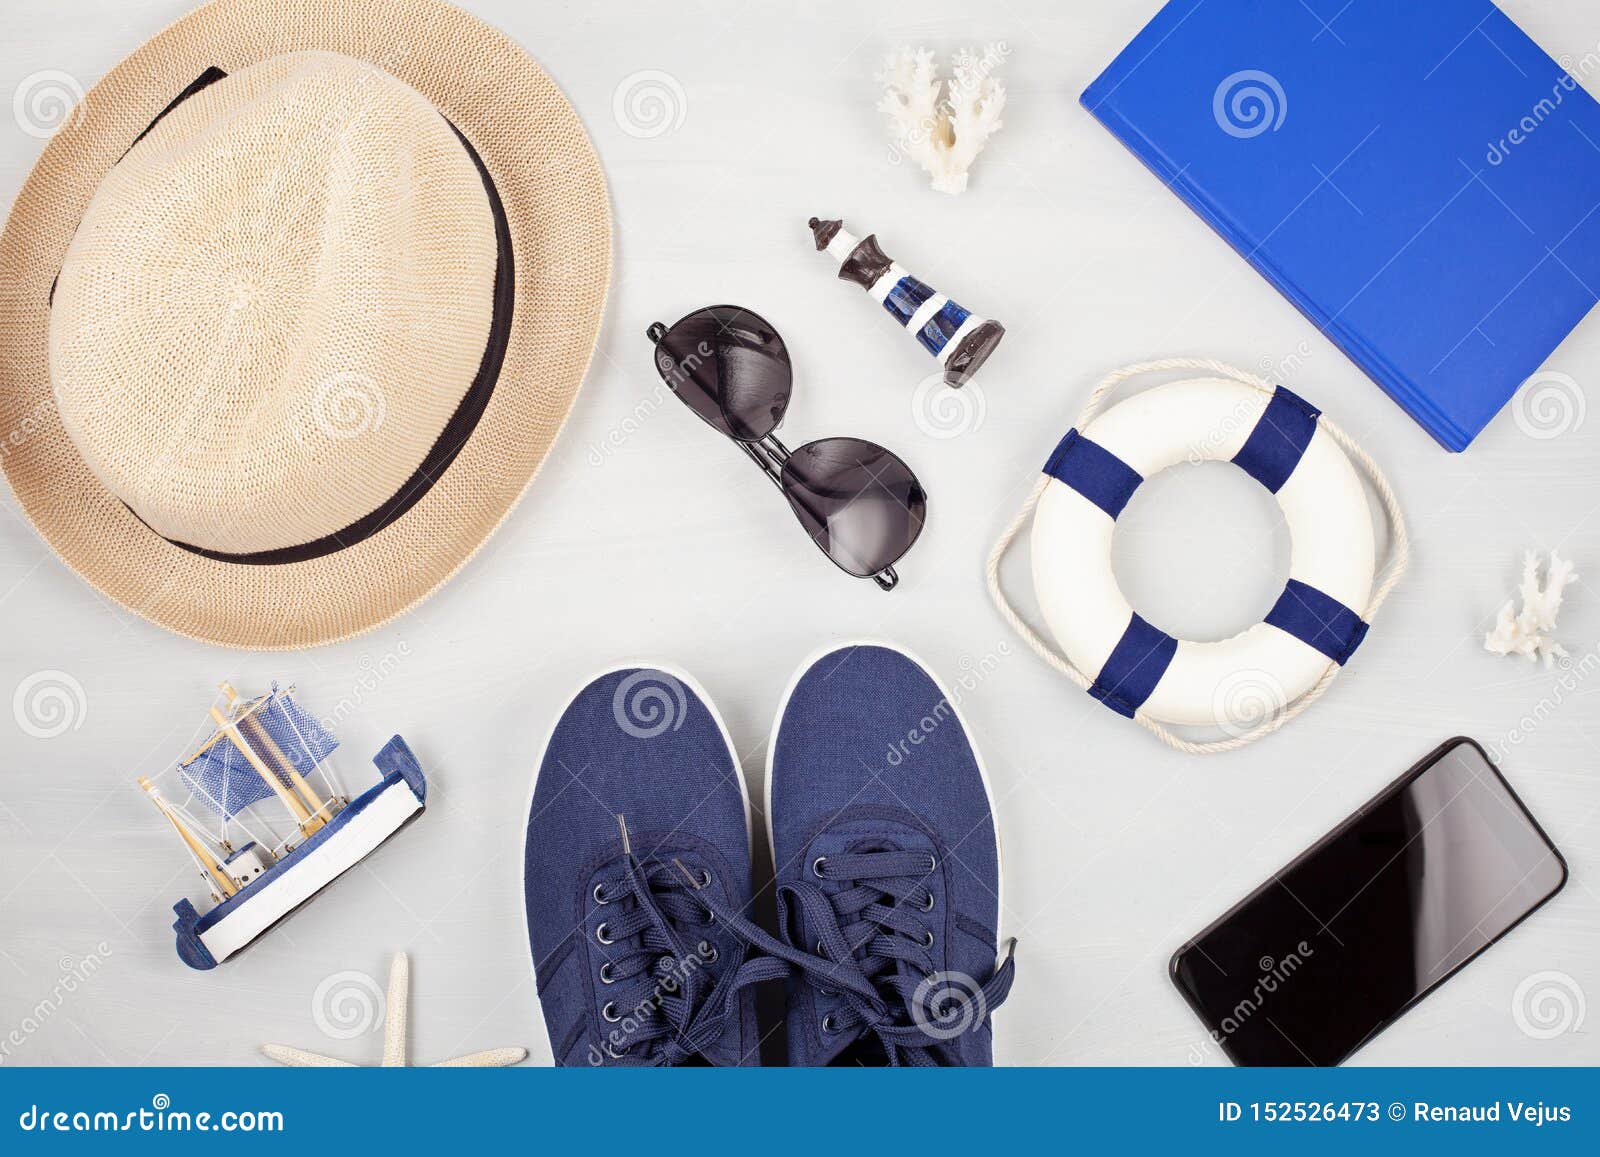 Summer Vacation, Travel, Tourism Concept Flat Lay. Beach, Casual Urban  Accessories for Men Stock Image - Image of summertime, flat: 152526473